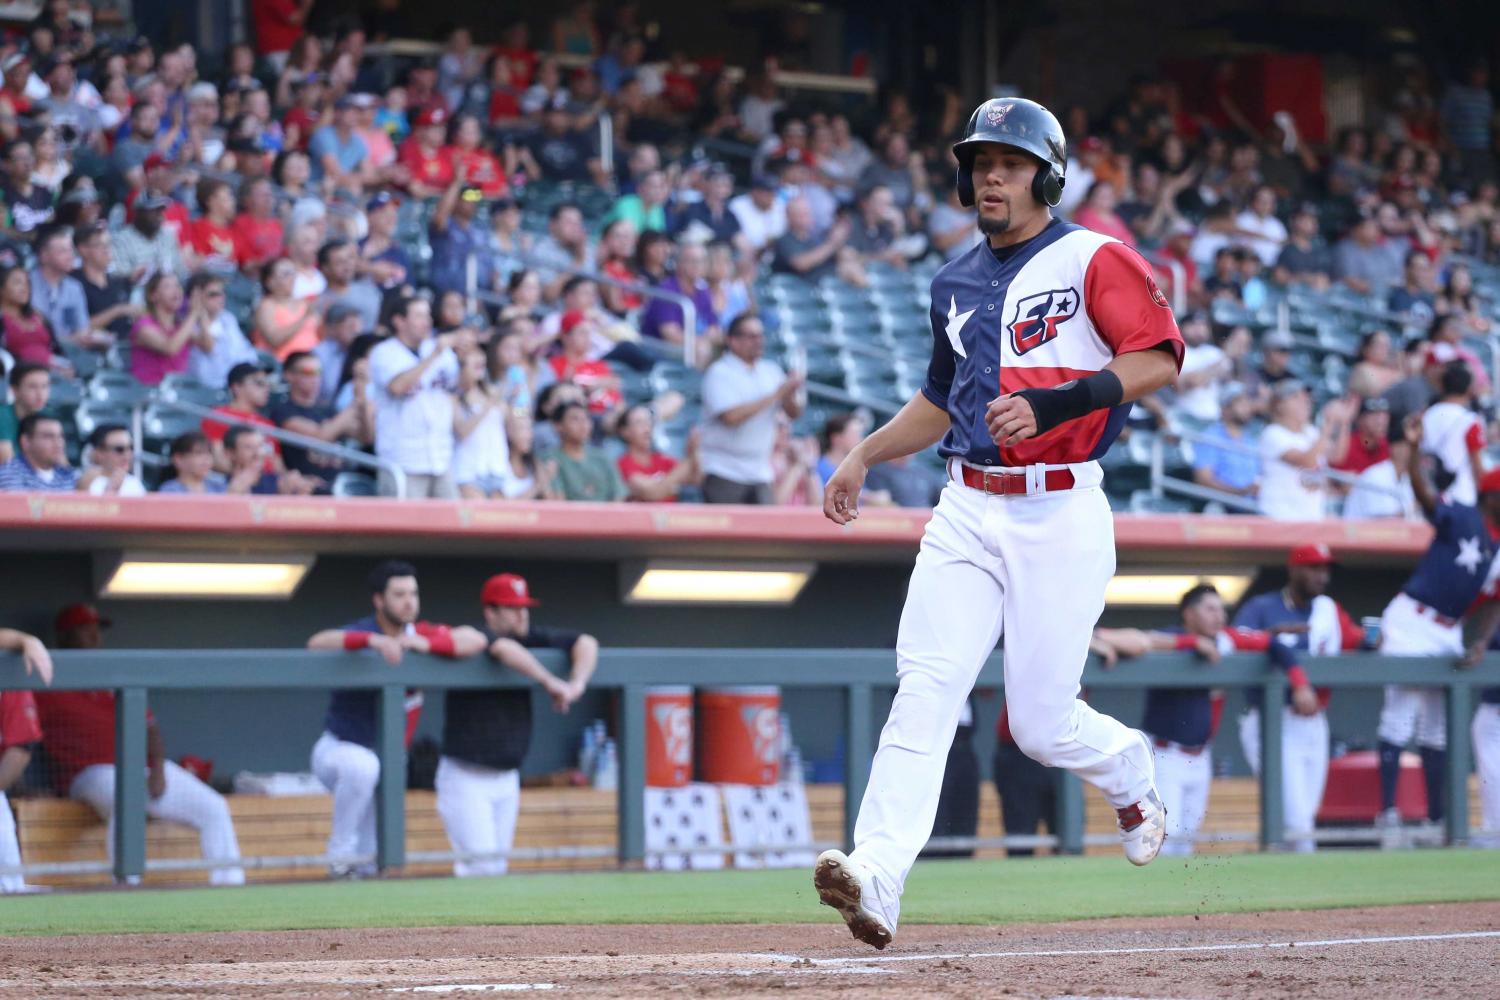 Chihuahuas+prevail+in+high+scoring+win+over+the+Grizzlies